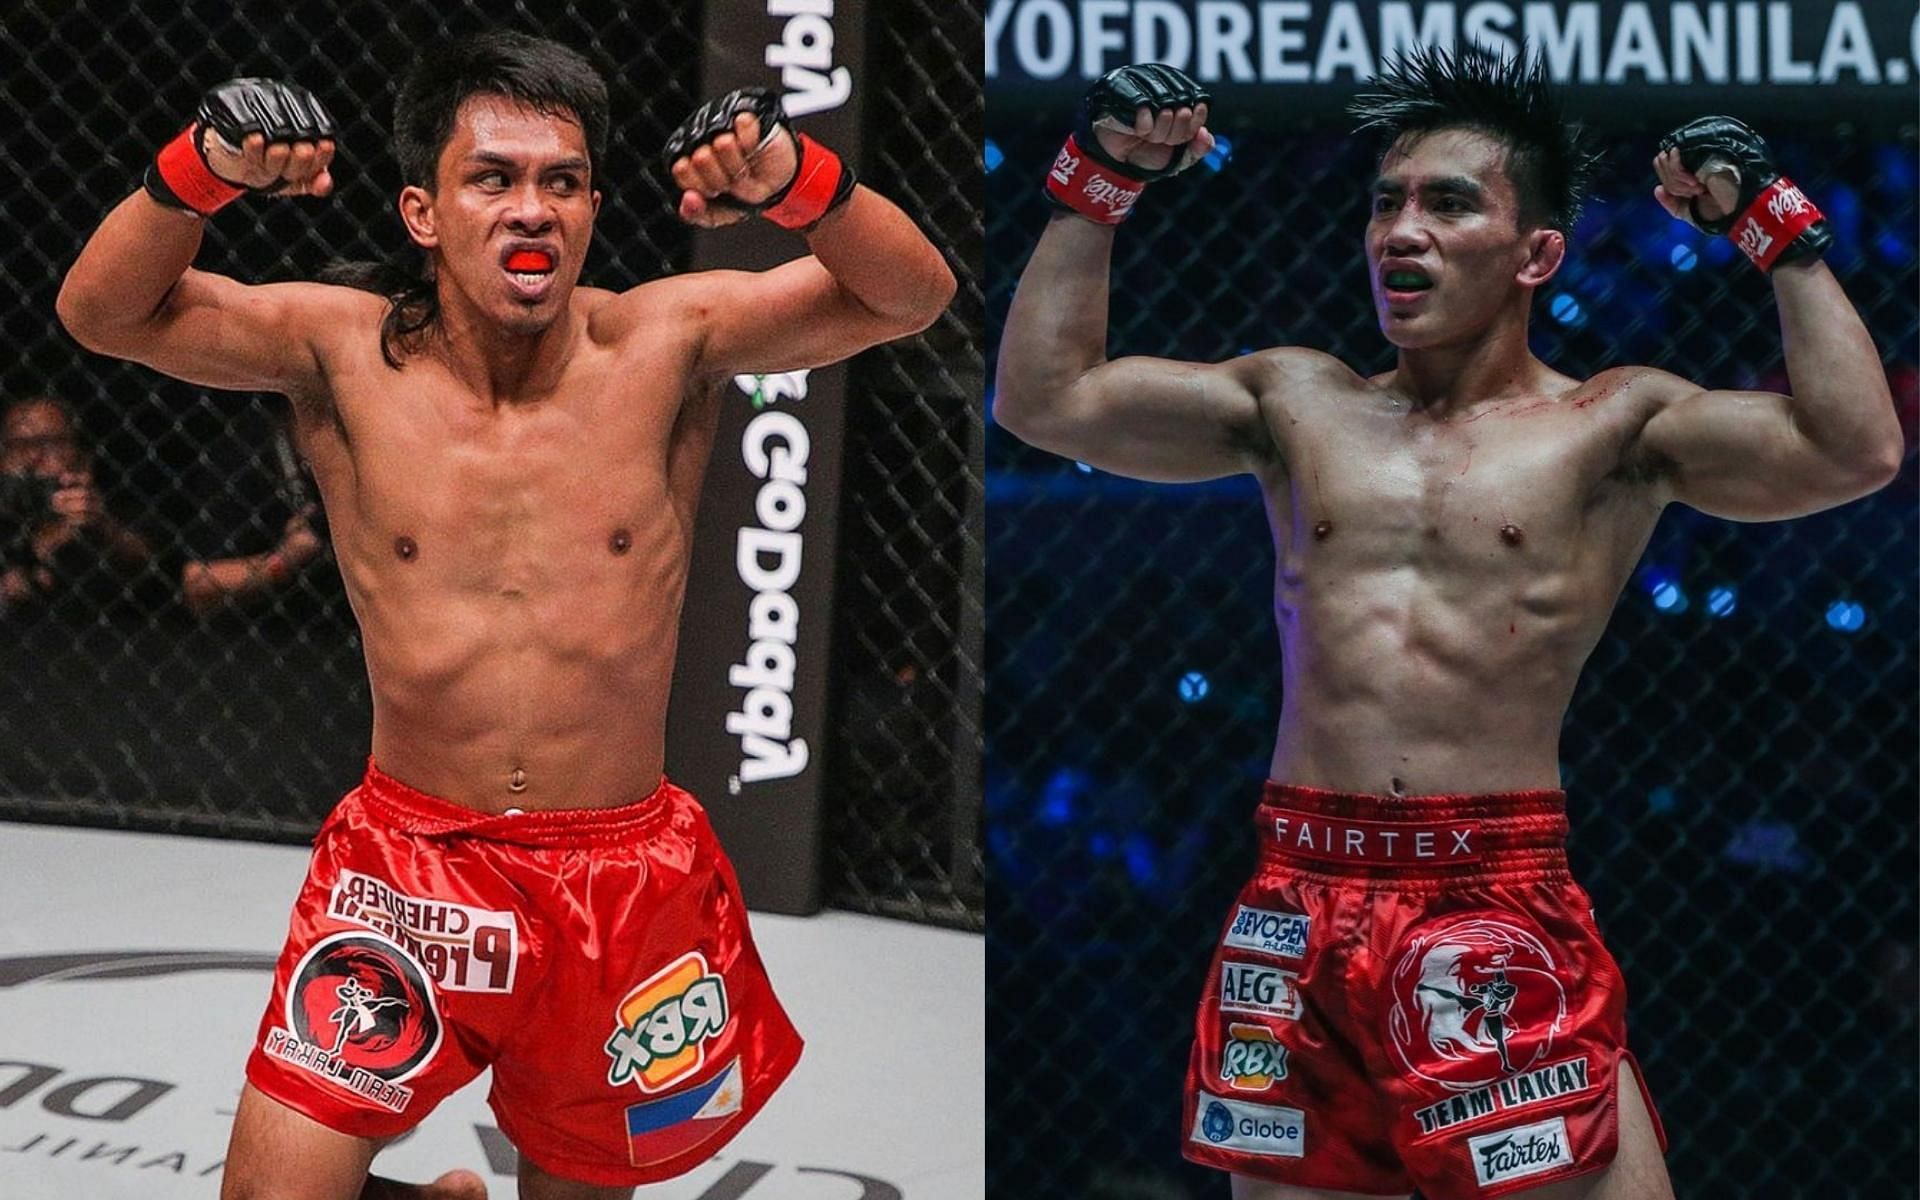 Former ONE bantamweight champion Kevin Belingon (left) and current ONE strawweight champion Joshua Pacio (right) sparred at Team Lakay. (Image courtesy of ONE Championship)